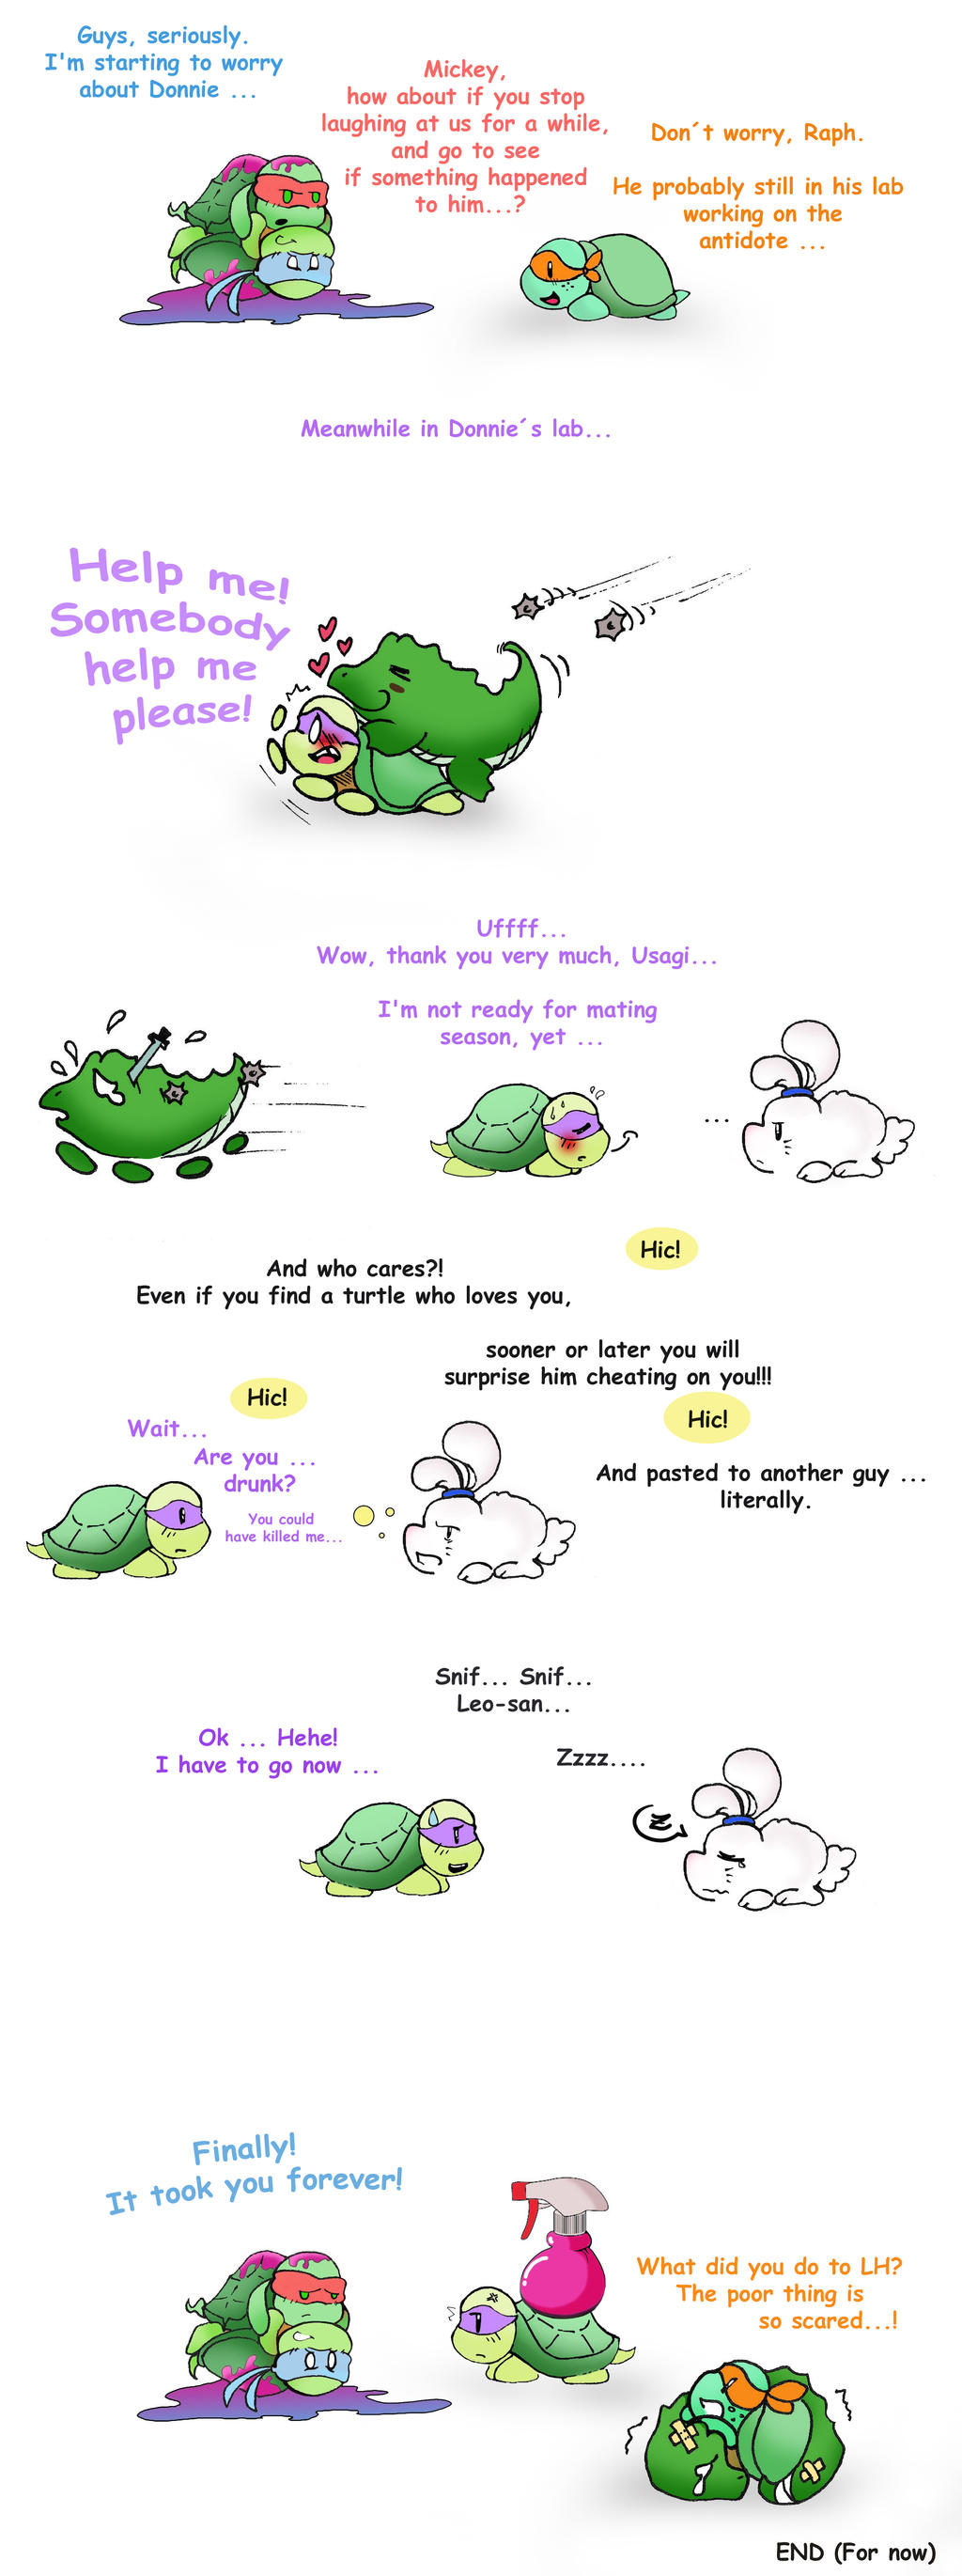 Tmnt - The Jelly Situation 5 by Kawaii-Week on DeviantArt